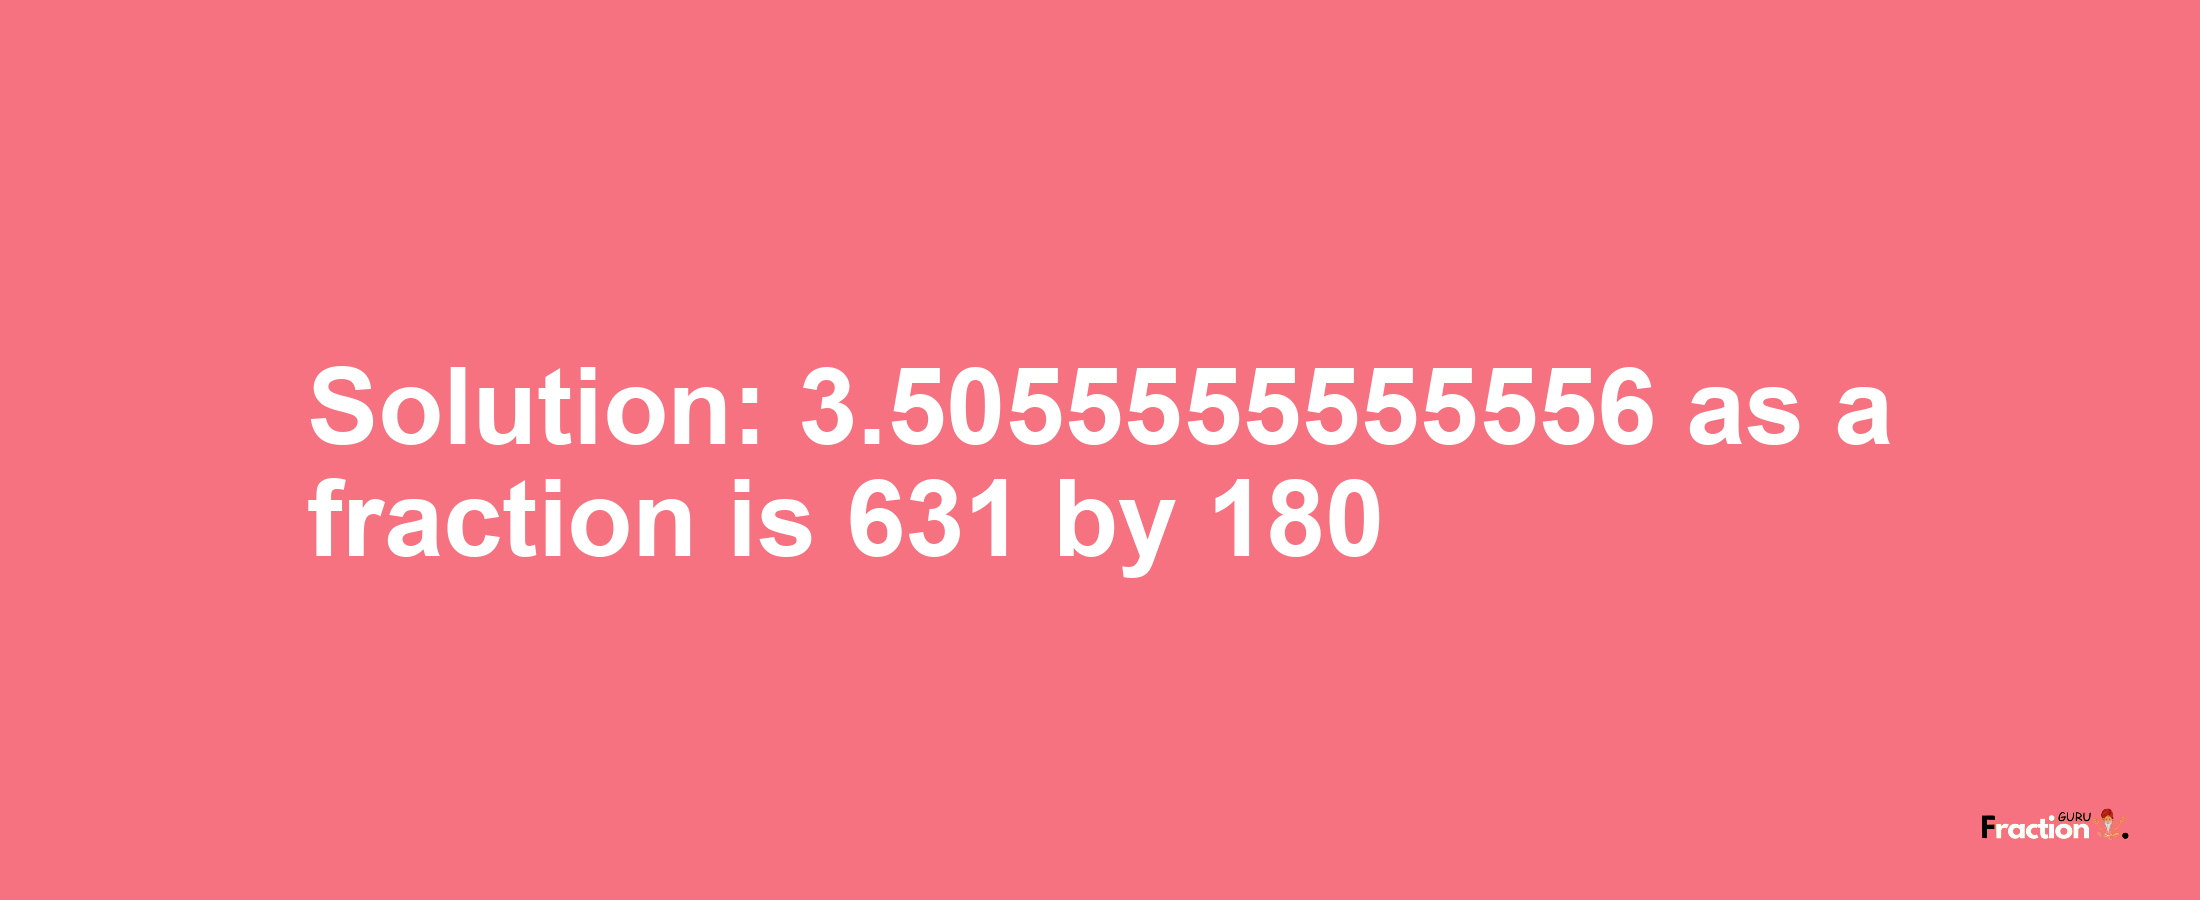 Solution:3.5055555555556 as a fraction is 631/180